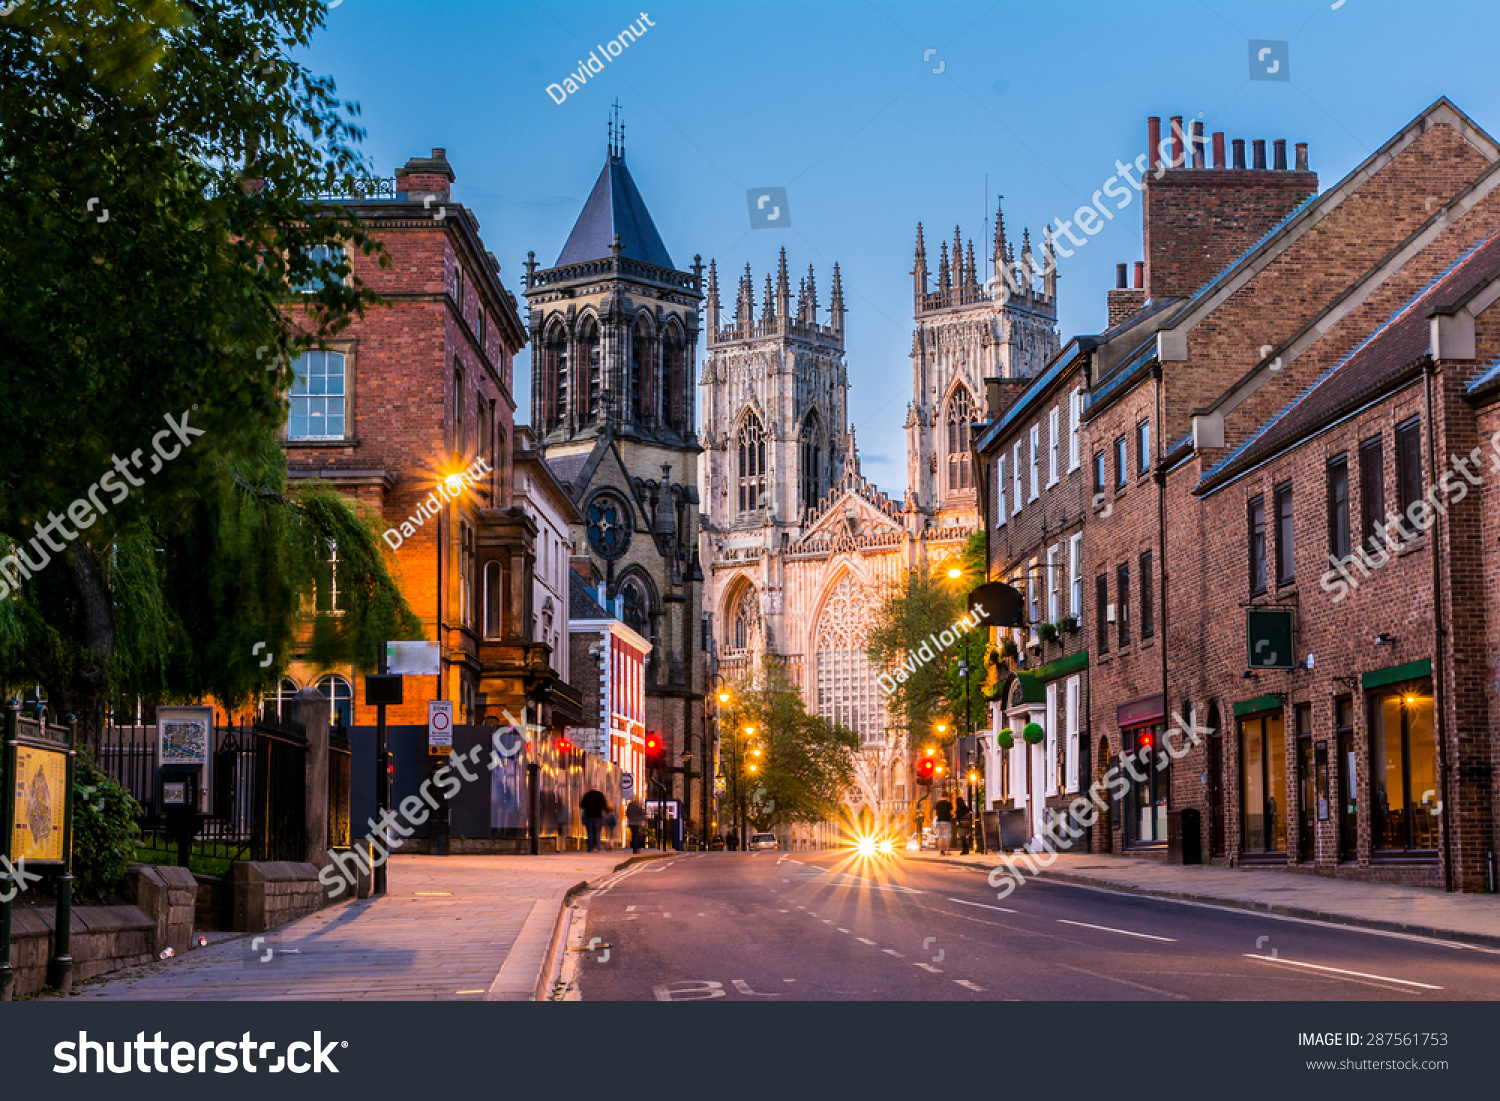 York, evening cityscape view from the street with York Minster in the background.England,United Kingdom,Europe #287561753